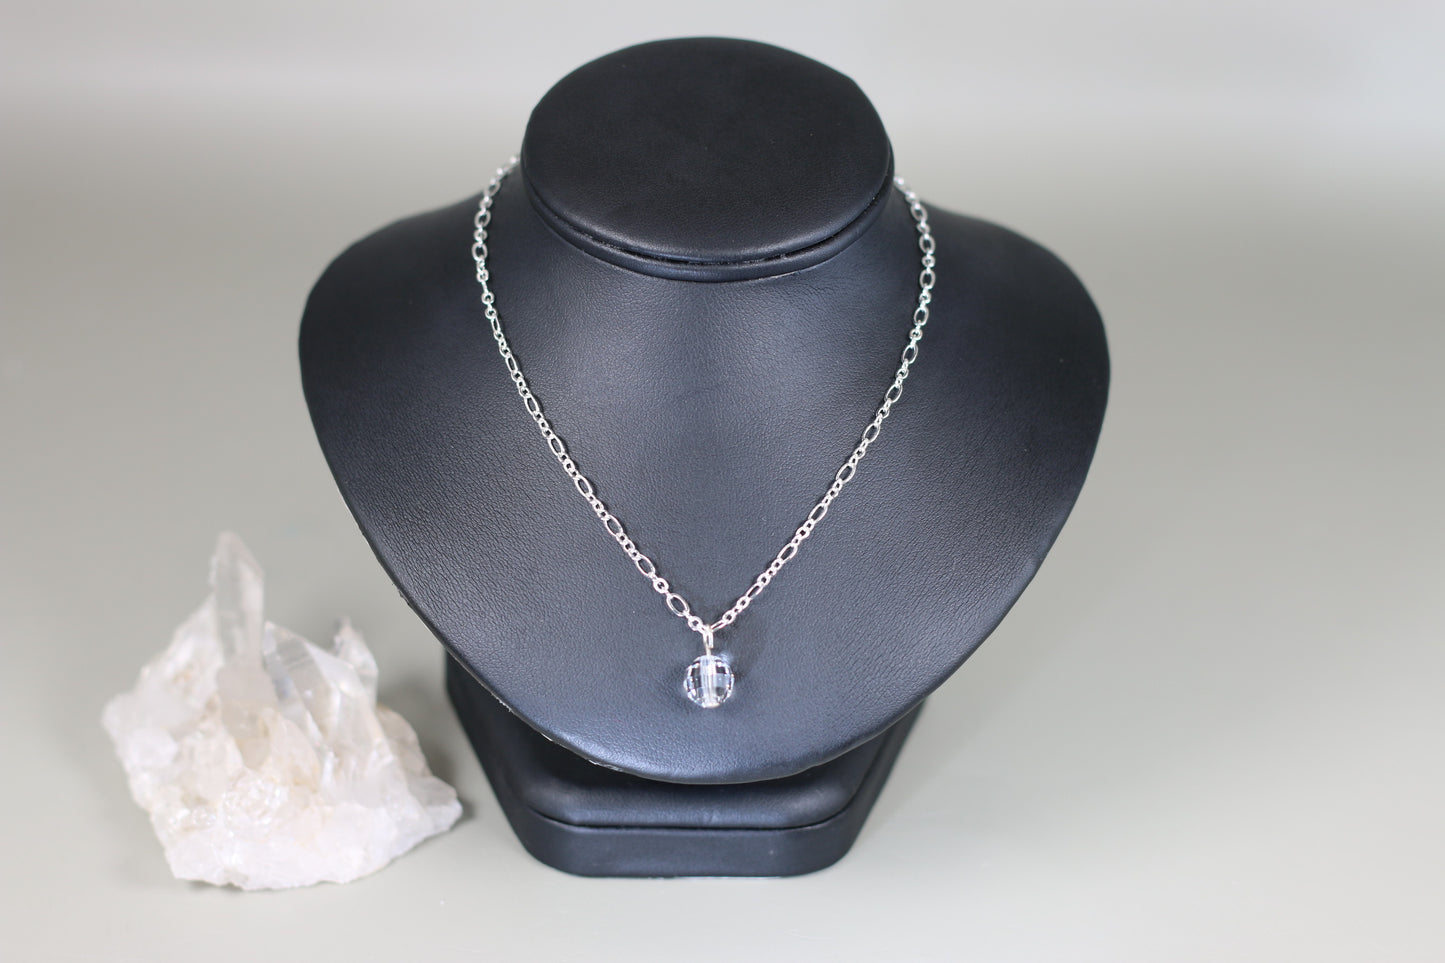 Chessboard Clear Austrian Crystal 18" Figaro Chain Necklace with Sterling Silver Components - Annabel's Jewelry & Leather